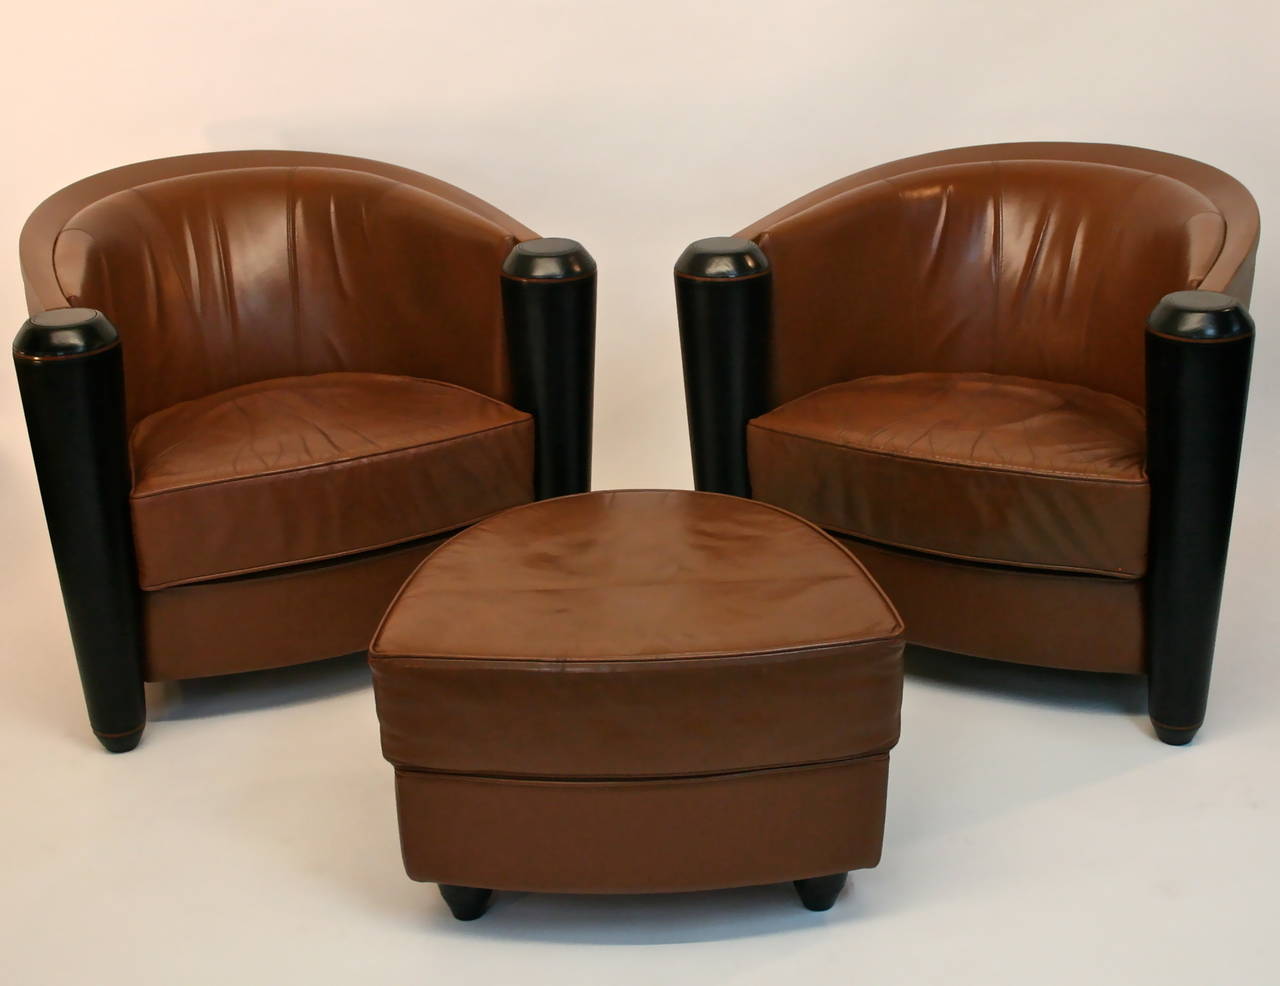 Pair of Italian leather Pace Collection club chairs and Ottomans. Designed by Adam Tihany. Manufactured by i4 Mariani. Chairs measure 39